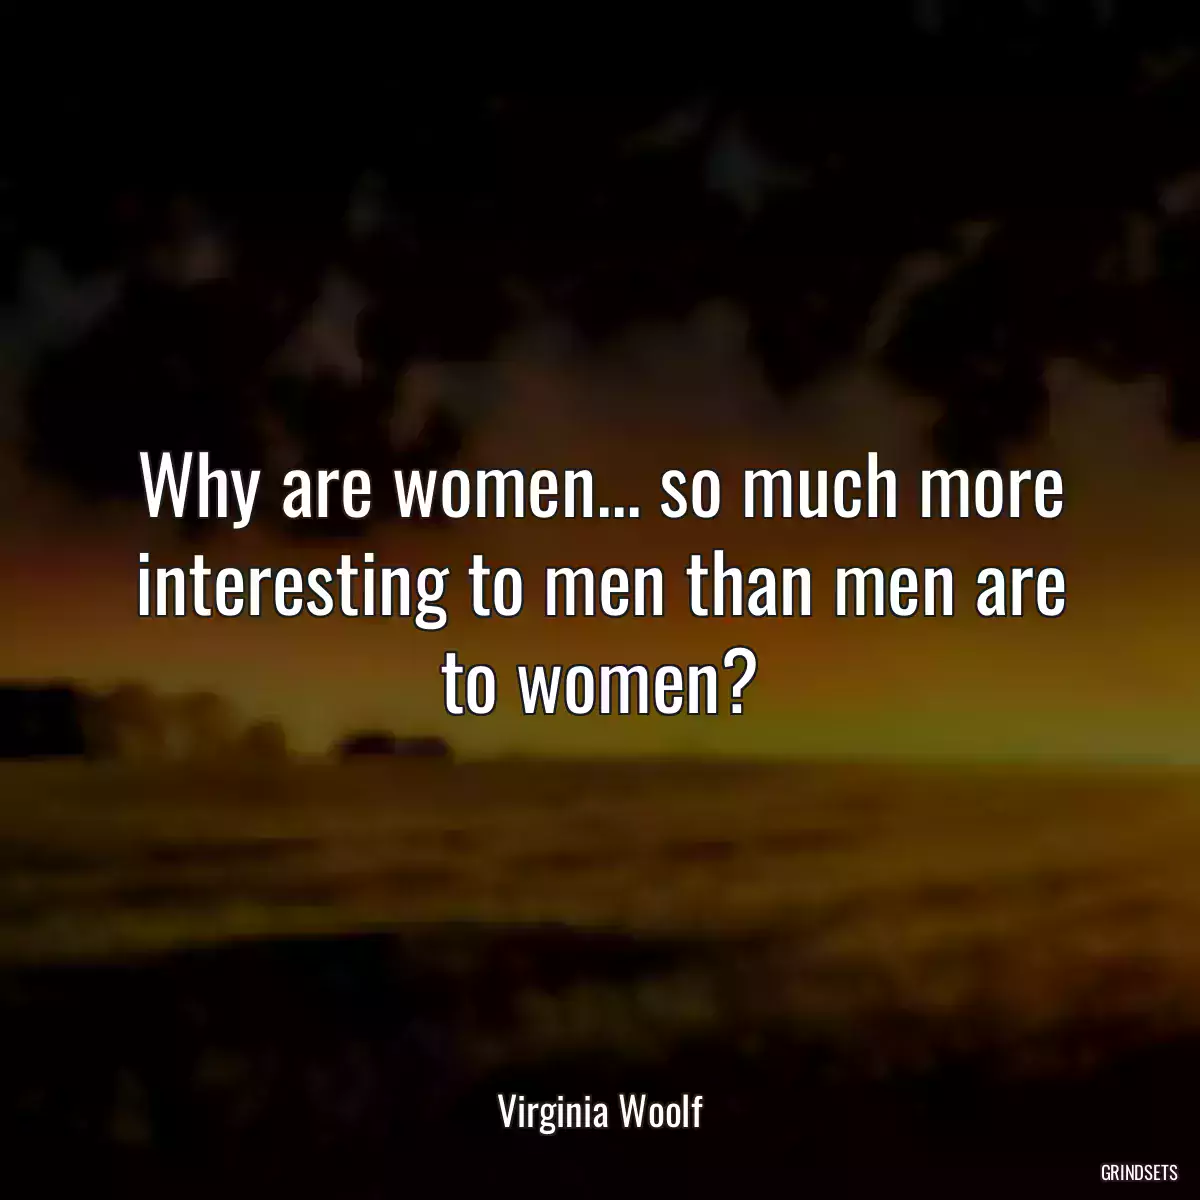 Why are women... so much more interesting to men than men are to women?